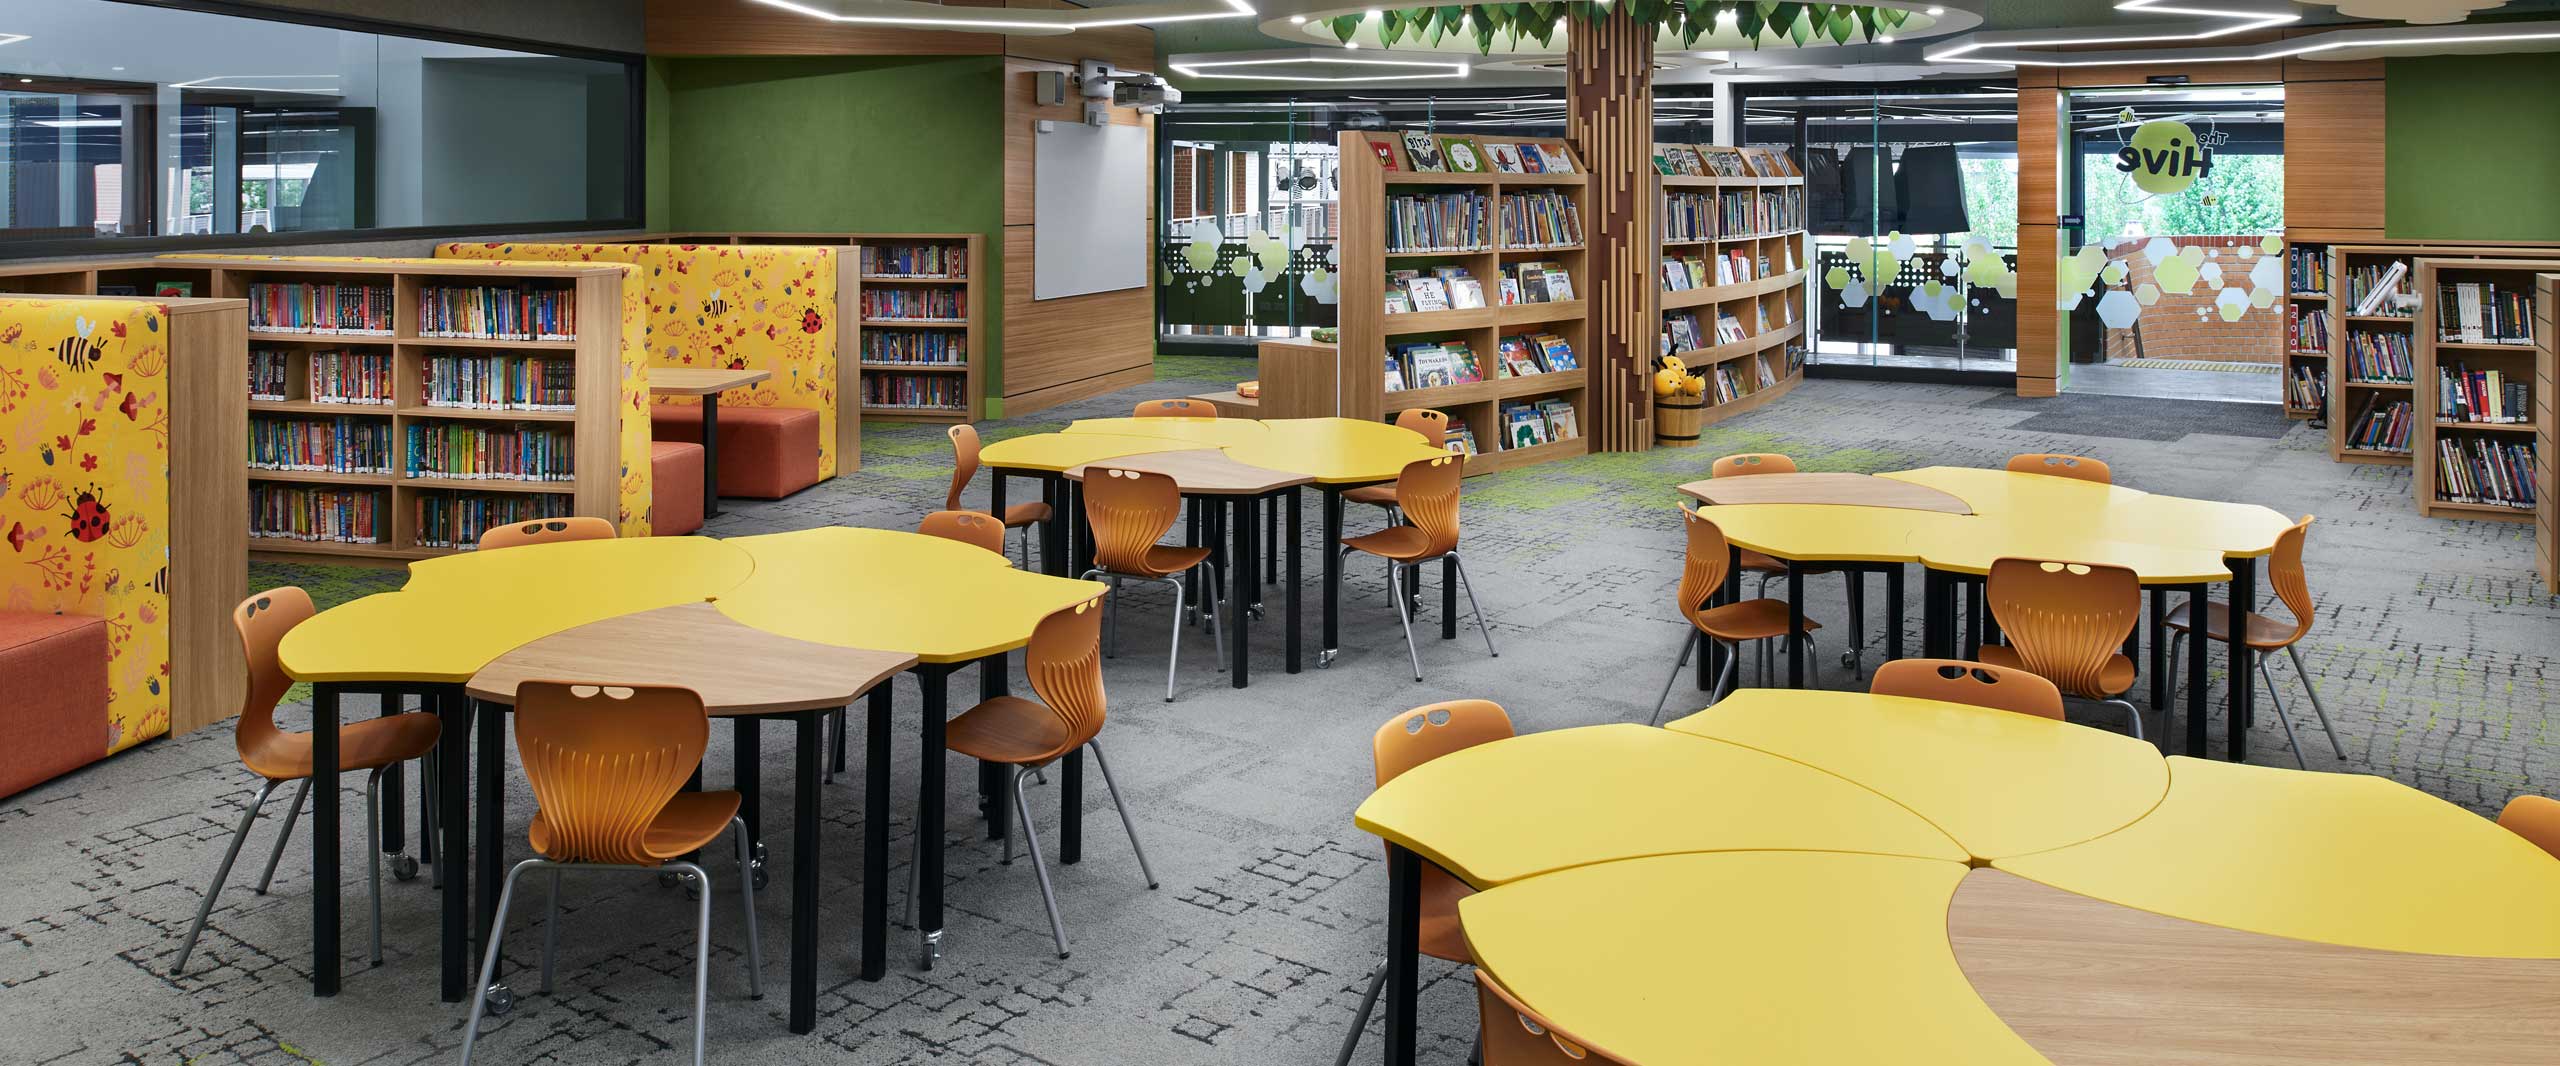 Inspiring Learning Spaces